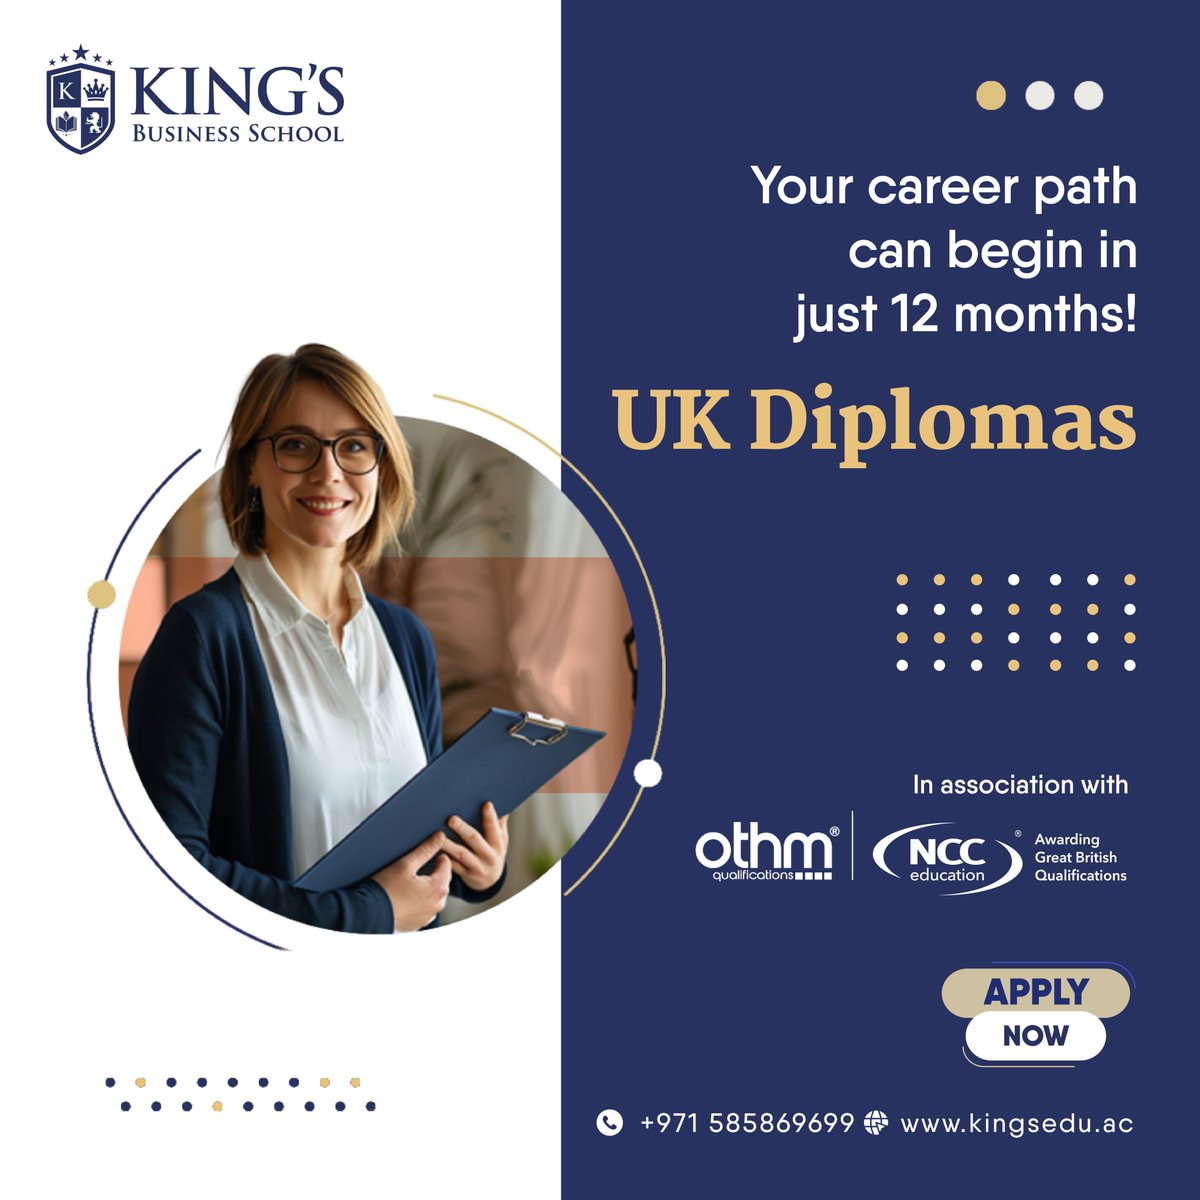 Level up your career! We offer specialized diplomas in everything from HR to Healthcare (partnered with OTHM & NCC). Find your perfect fit & launch your dream job!
.
.
#Diploma #CareerGoals #DiplomaPrograms #kingsbusinessschool #DiplomaCourses